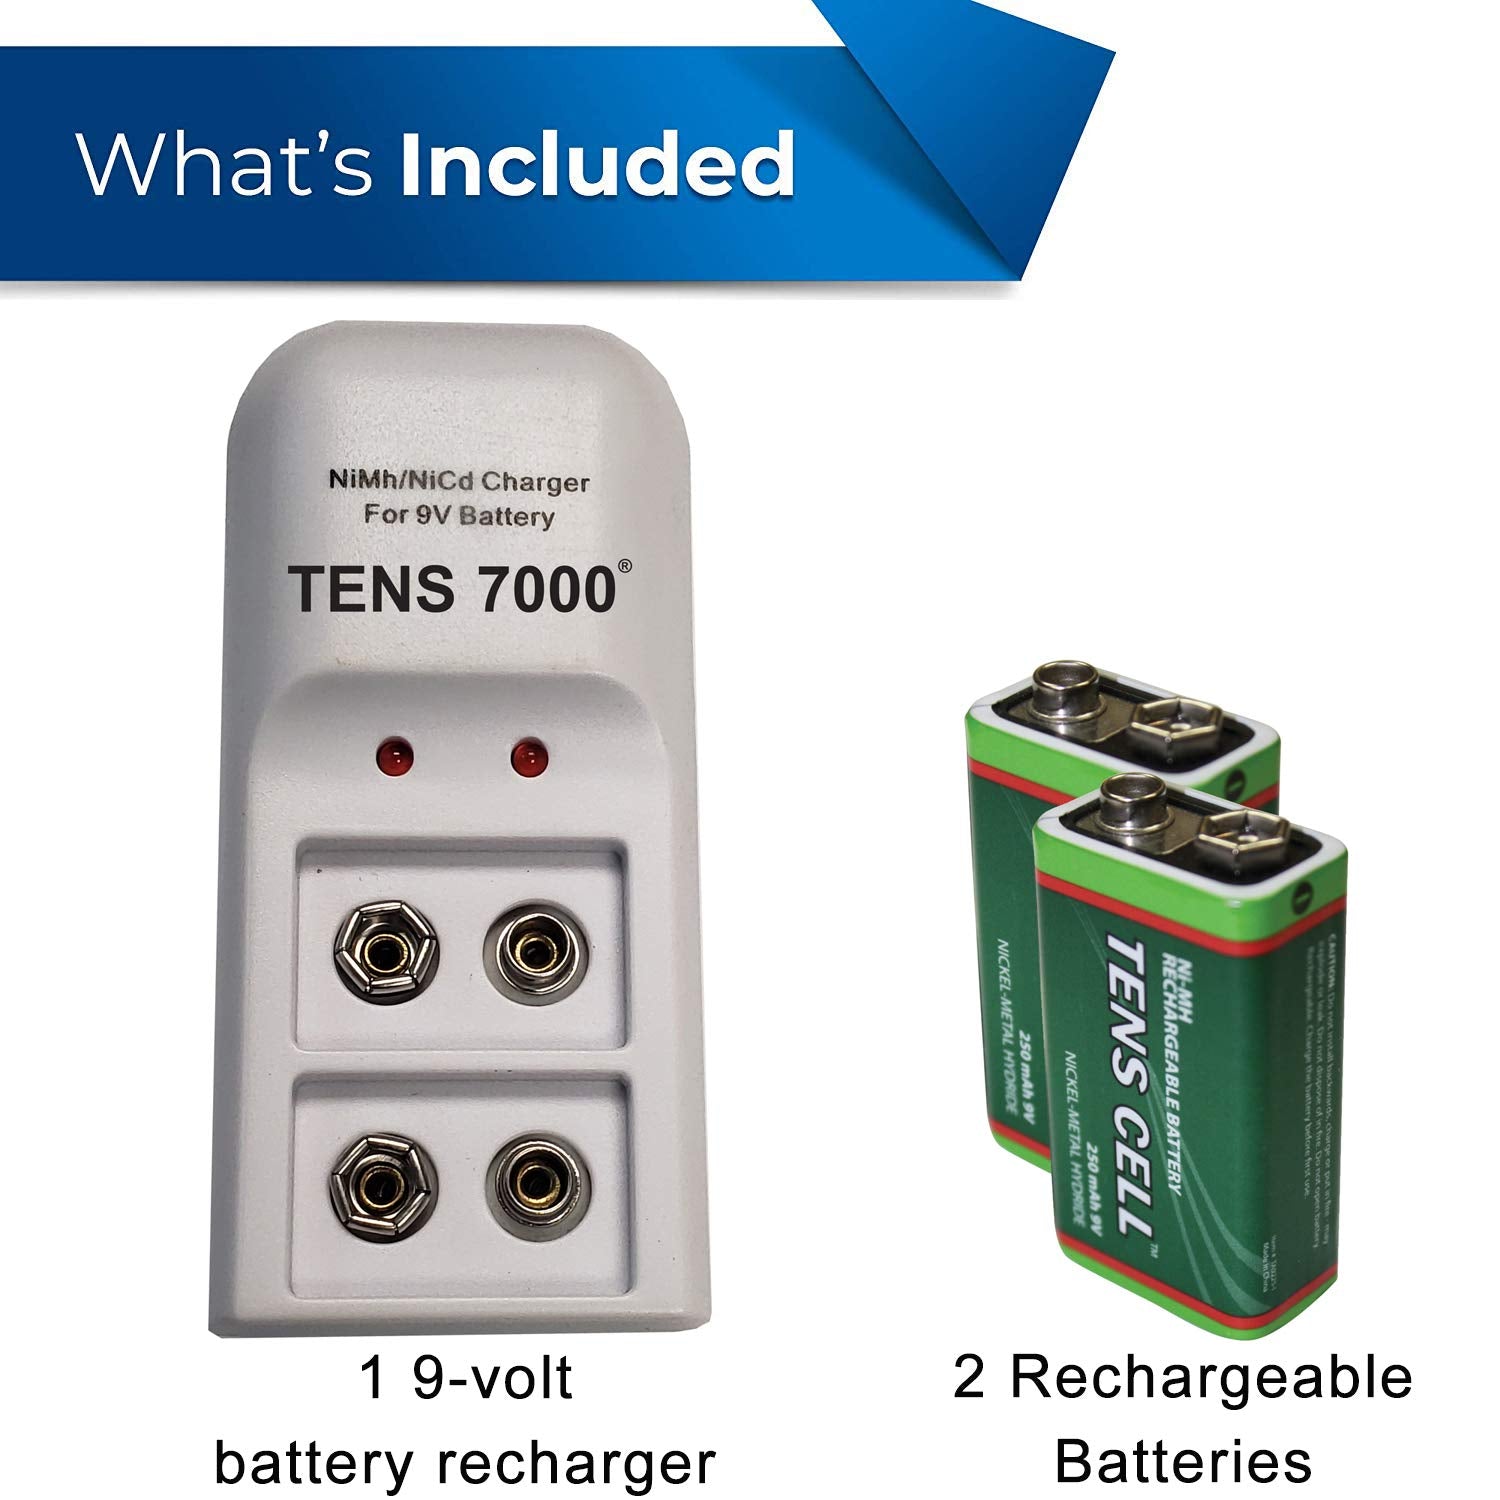 Tens 7000 Official Rechargeable 9V Batteries Kit - Includes NiMH/NiCd Charger and 2 Rechargable 9 Volt Batteries - Tens Unit Battery Pack